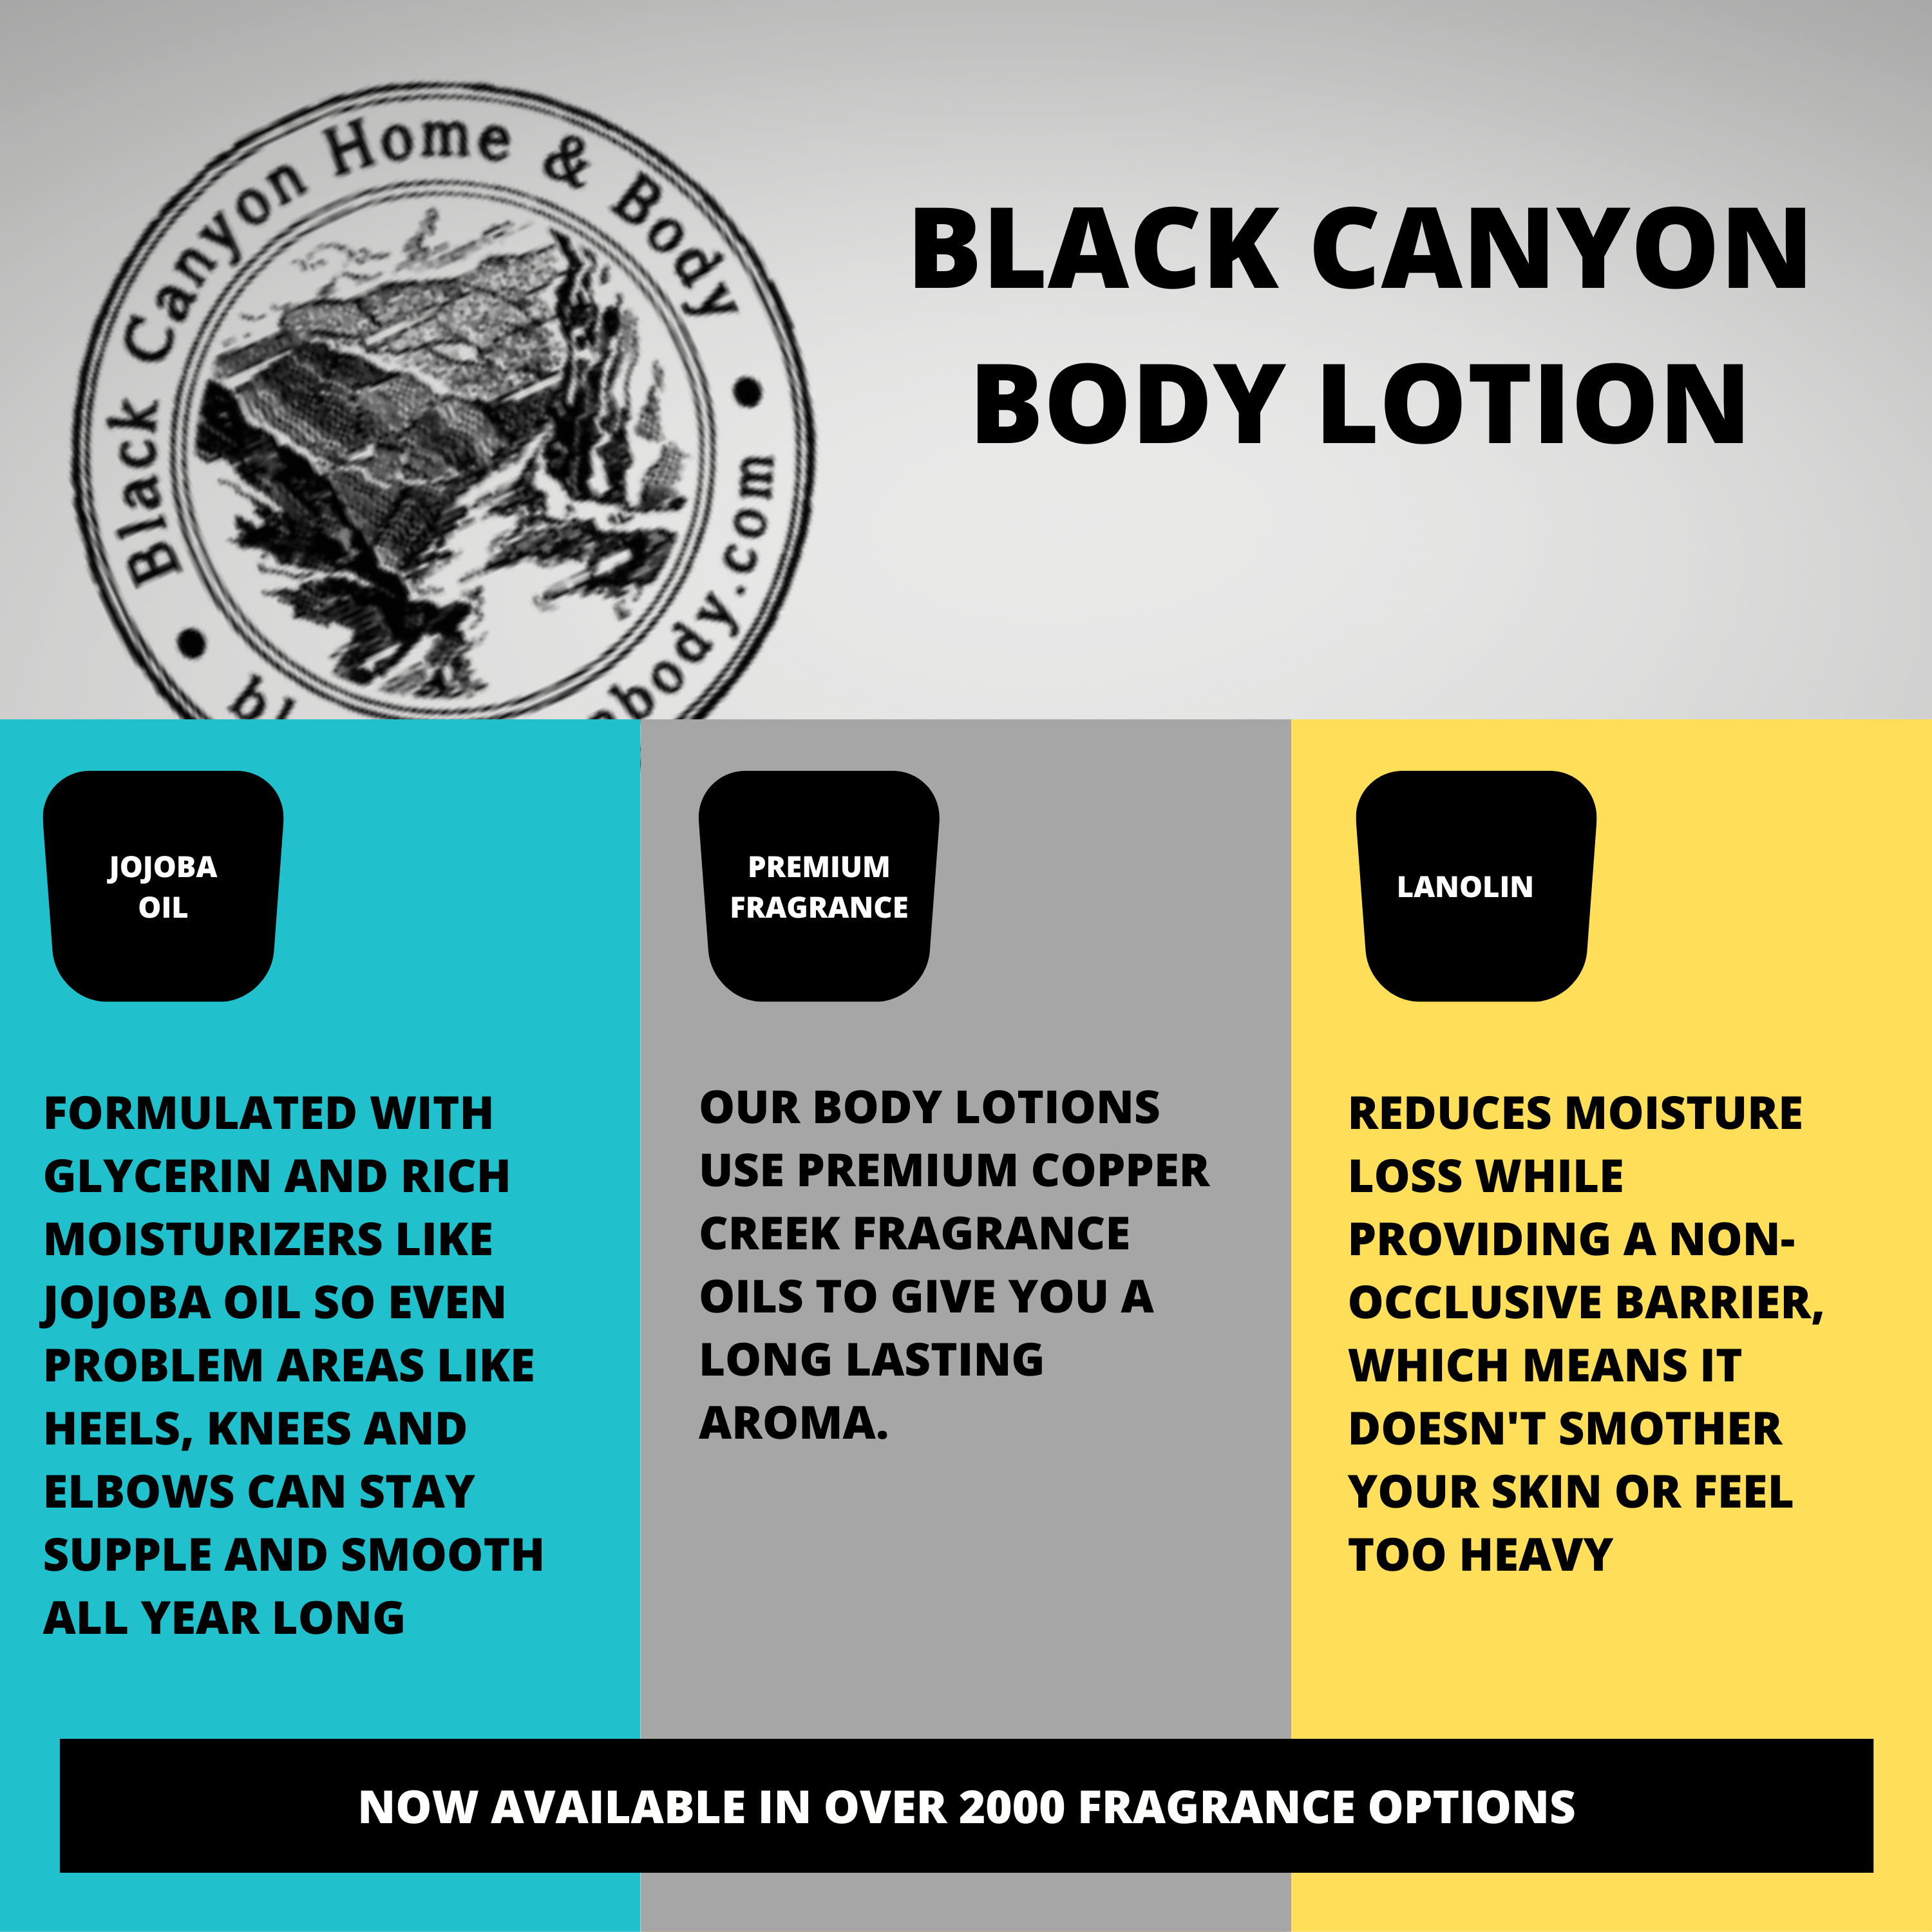 Black Canyon Banana Brulee Scented Luxury Body Lotion with Lanolin and Jojoba Oil